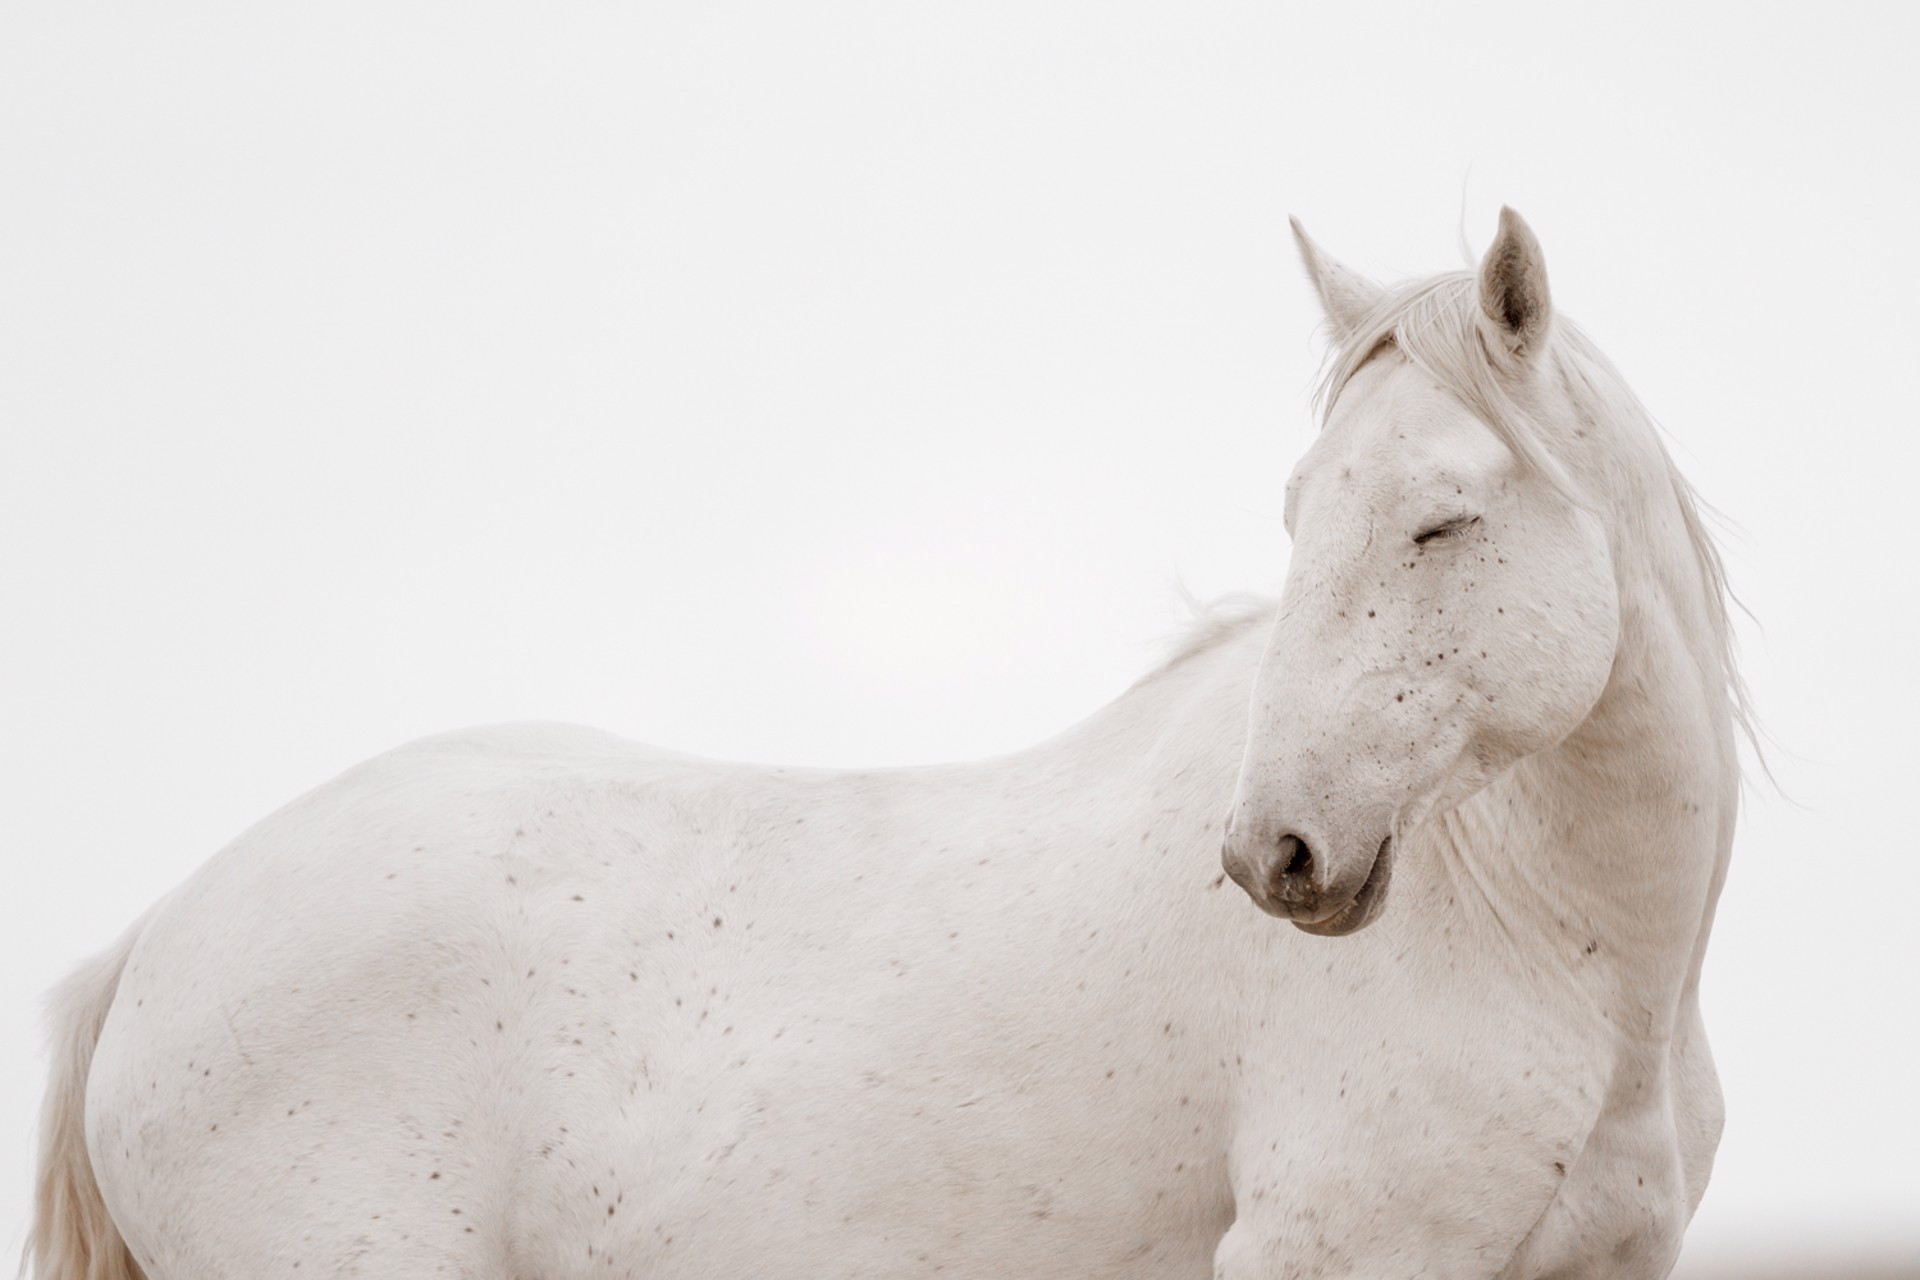 Photograph Featuring A White Wild Horse Facing Camera With Eyes Closed